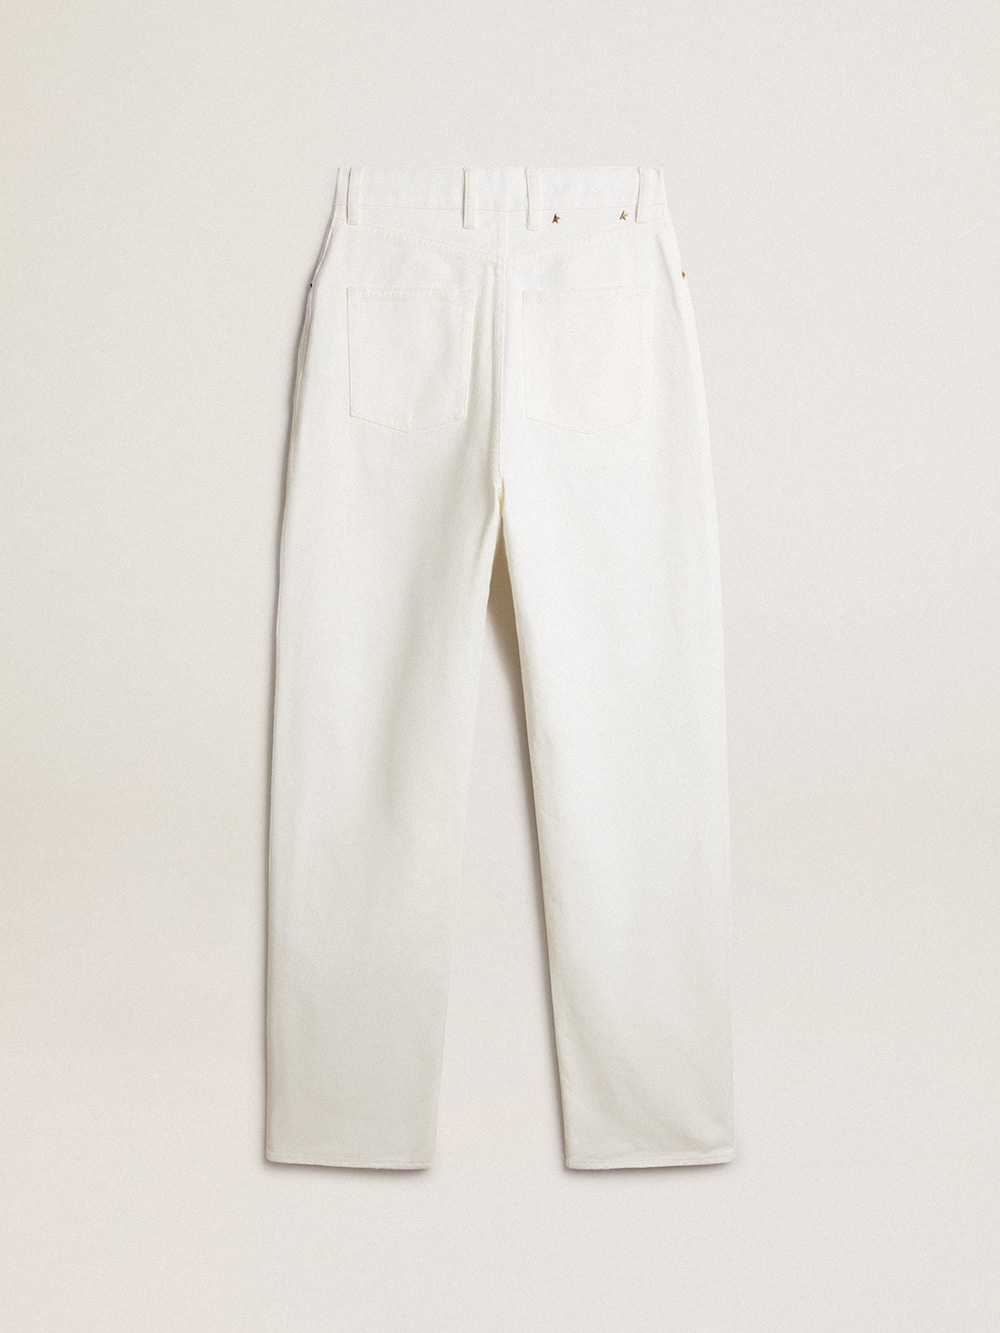 Golden Goose - Women's optical white-colored cotton denim pants in 